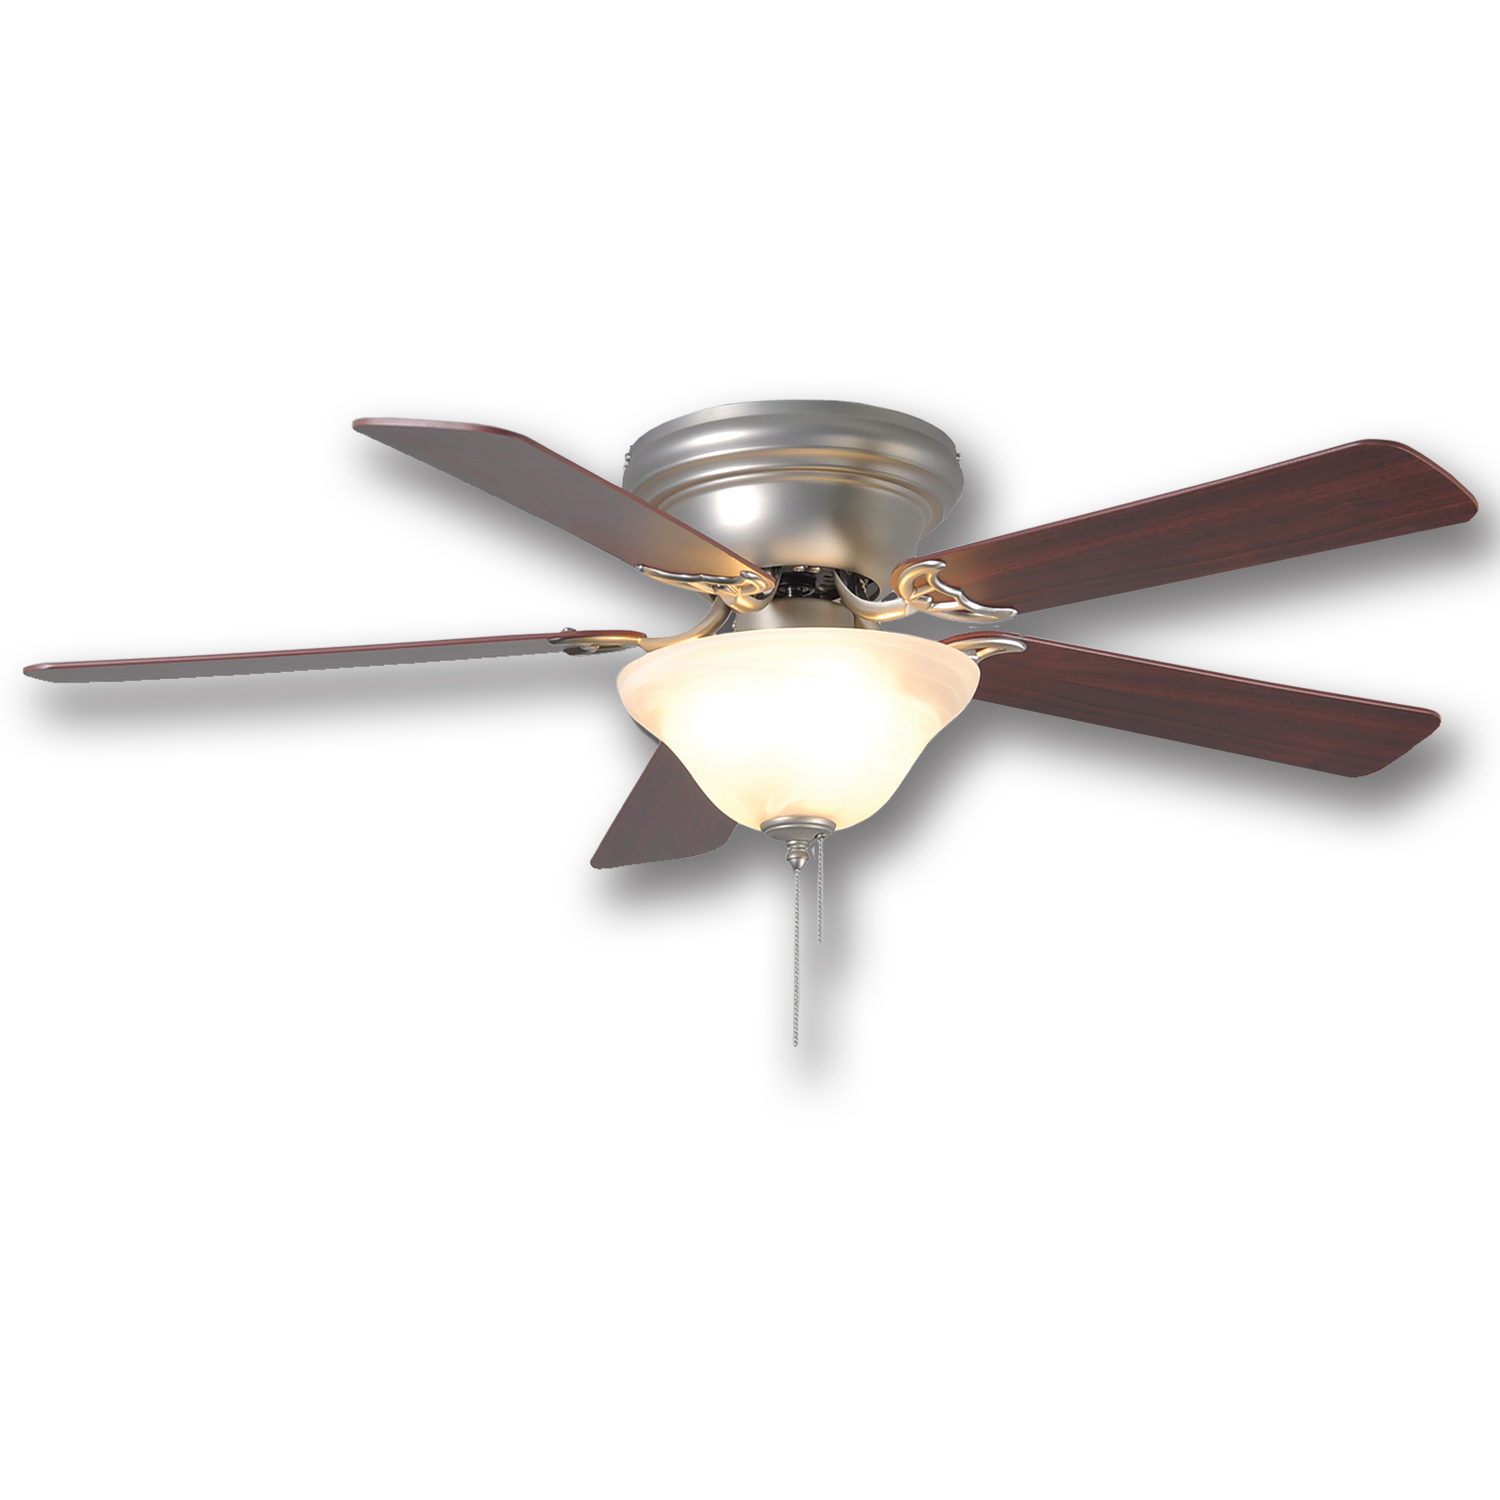 Chadwell Supply. 52" HUGGER CEILING FAN WITH LIGHT, 5 PRE-ASSEMBLED